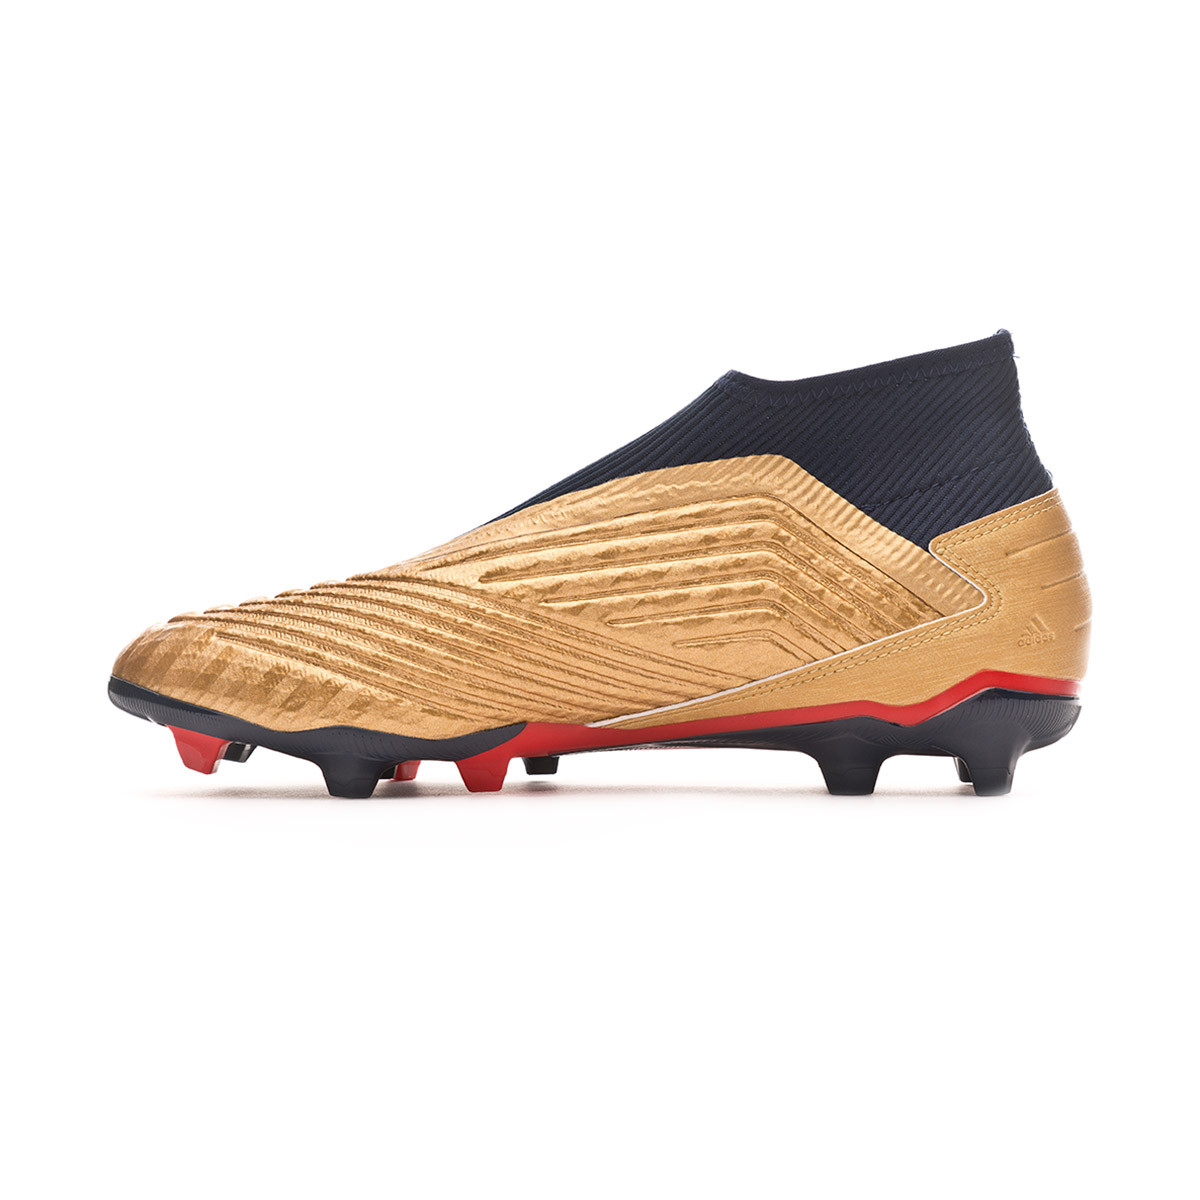 predator 19.3 firm ground boots black and gold